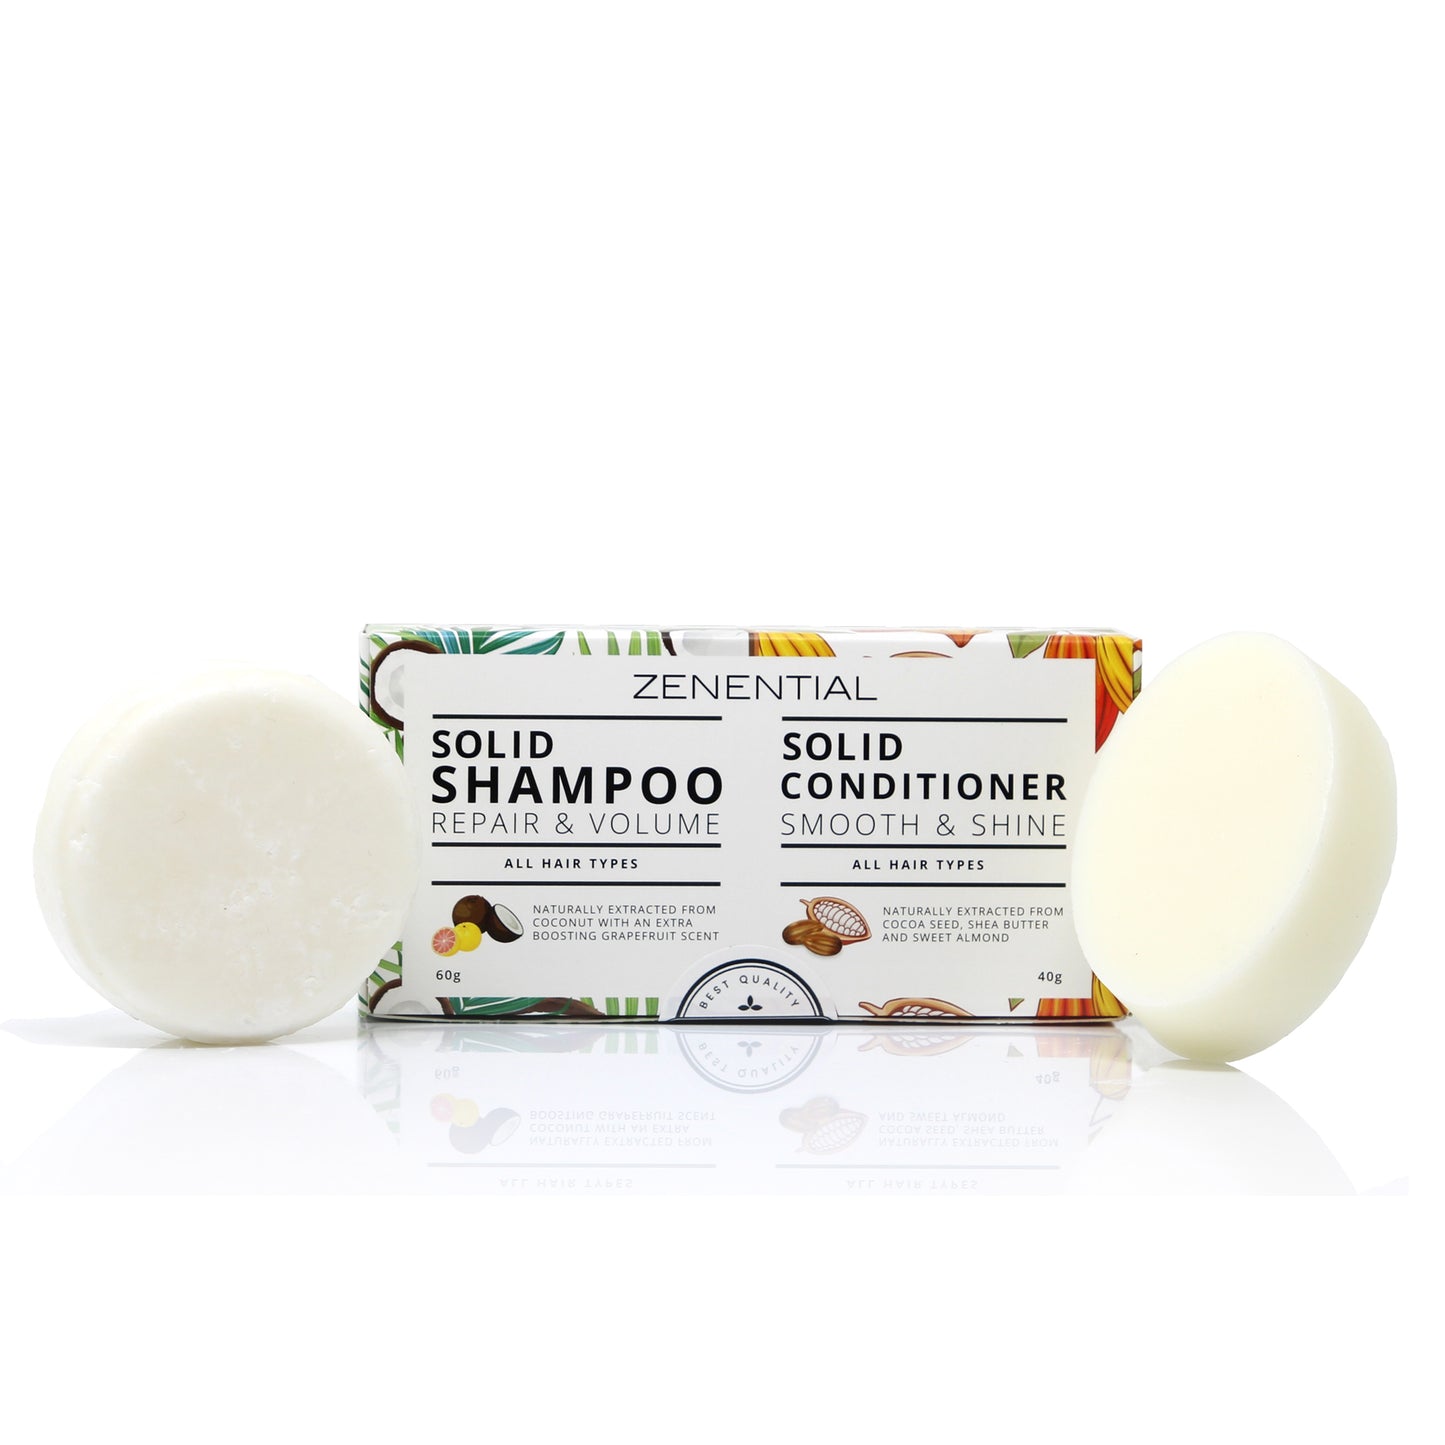 Solid Shampoo + Conditioner, 2 Pack (60gr + 40g) - Smooth and Shine